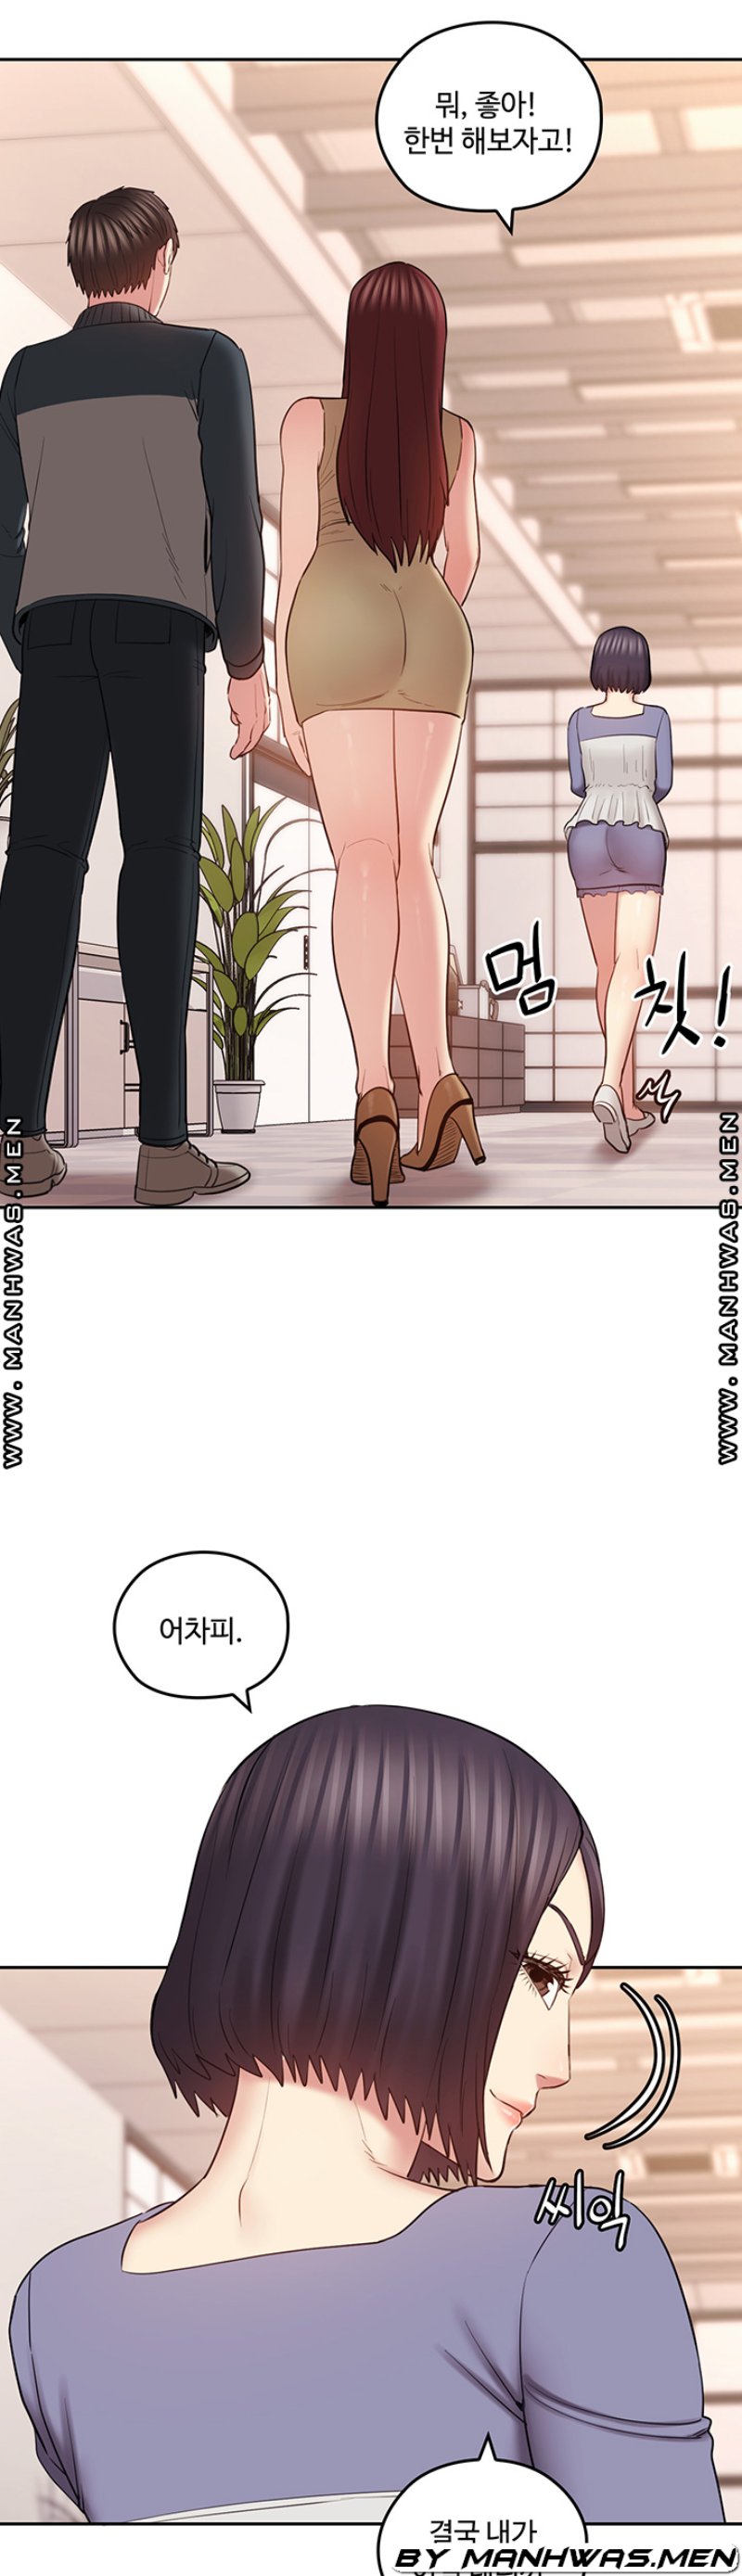 Sok Gung Hap Consulting Raw - Chapter 21 Page 47